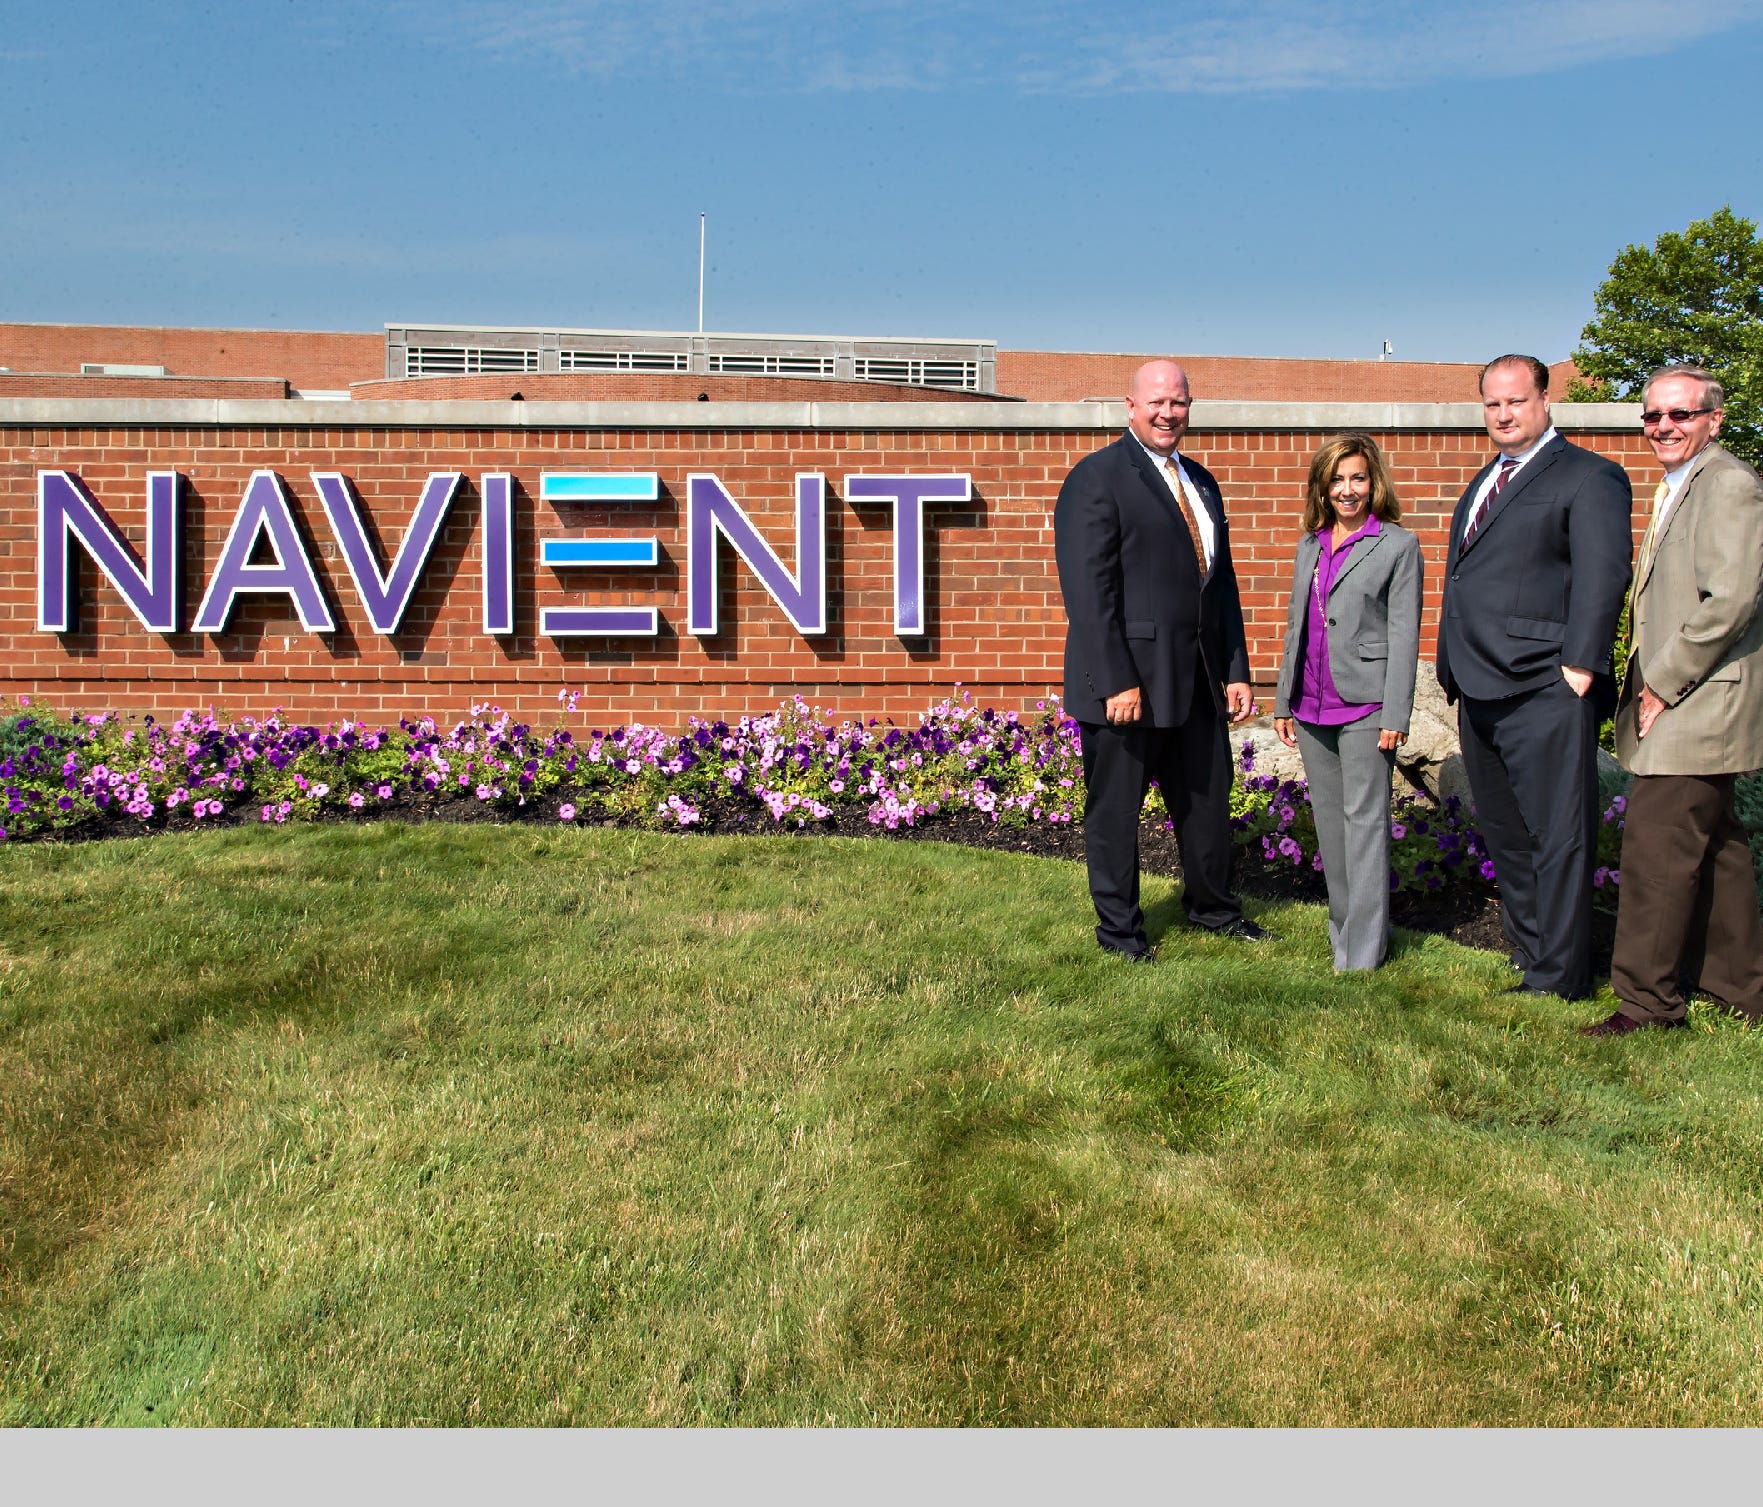 File photo taken in 2014 shows local officials and Navient unveiling a new sign for the nation's largest student loan servicing company.